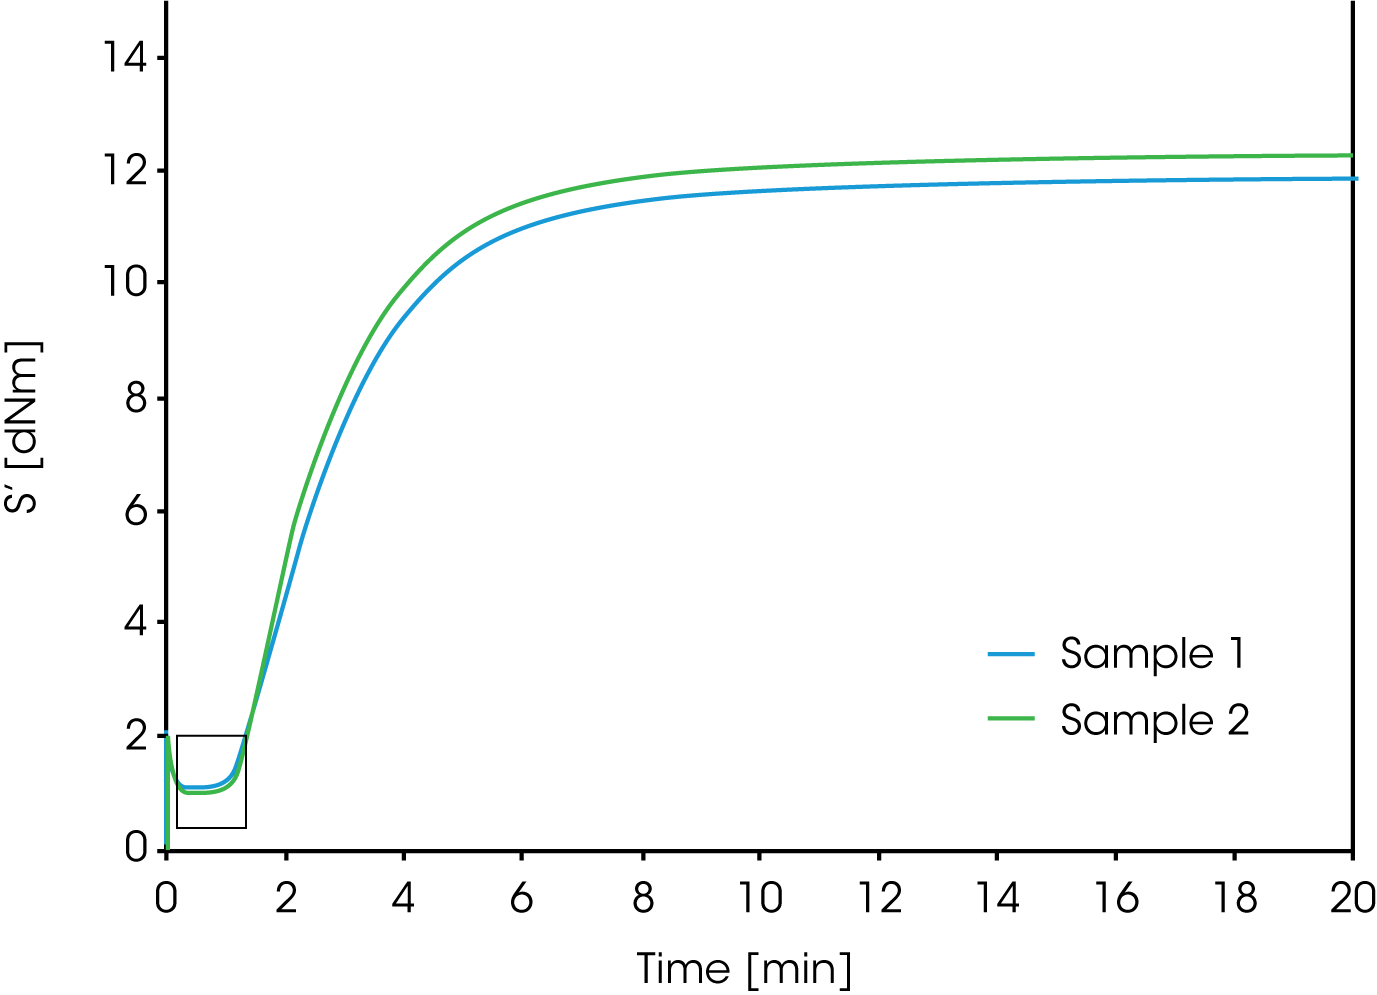 Figure 1. Moving die rheometer (MDR) cure curves of two batches of rubber compound. The minimum torque of both curves is similar indicating they should process similarly, however behavior in the manufacturing process differed.